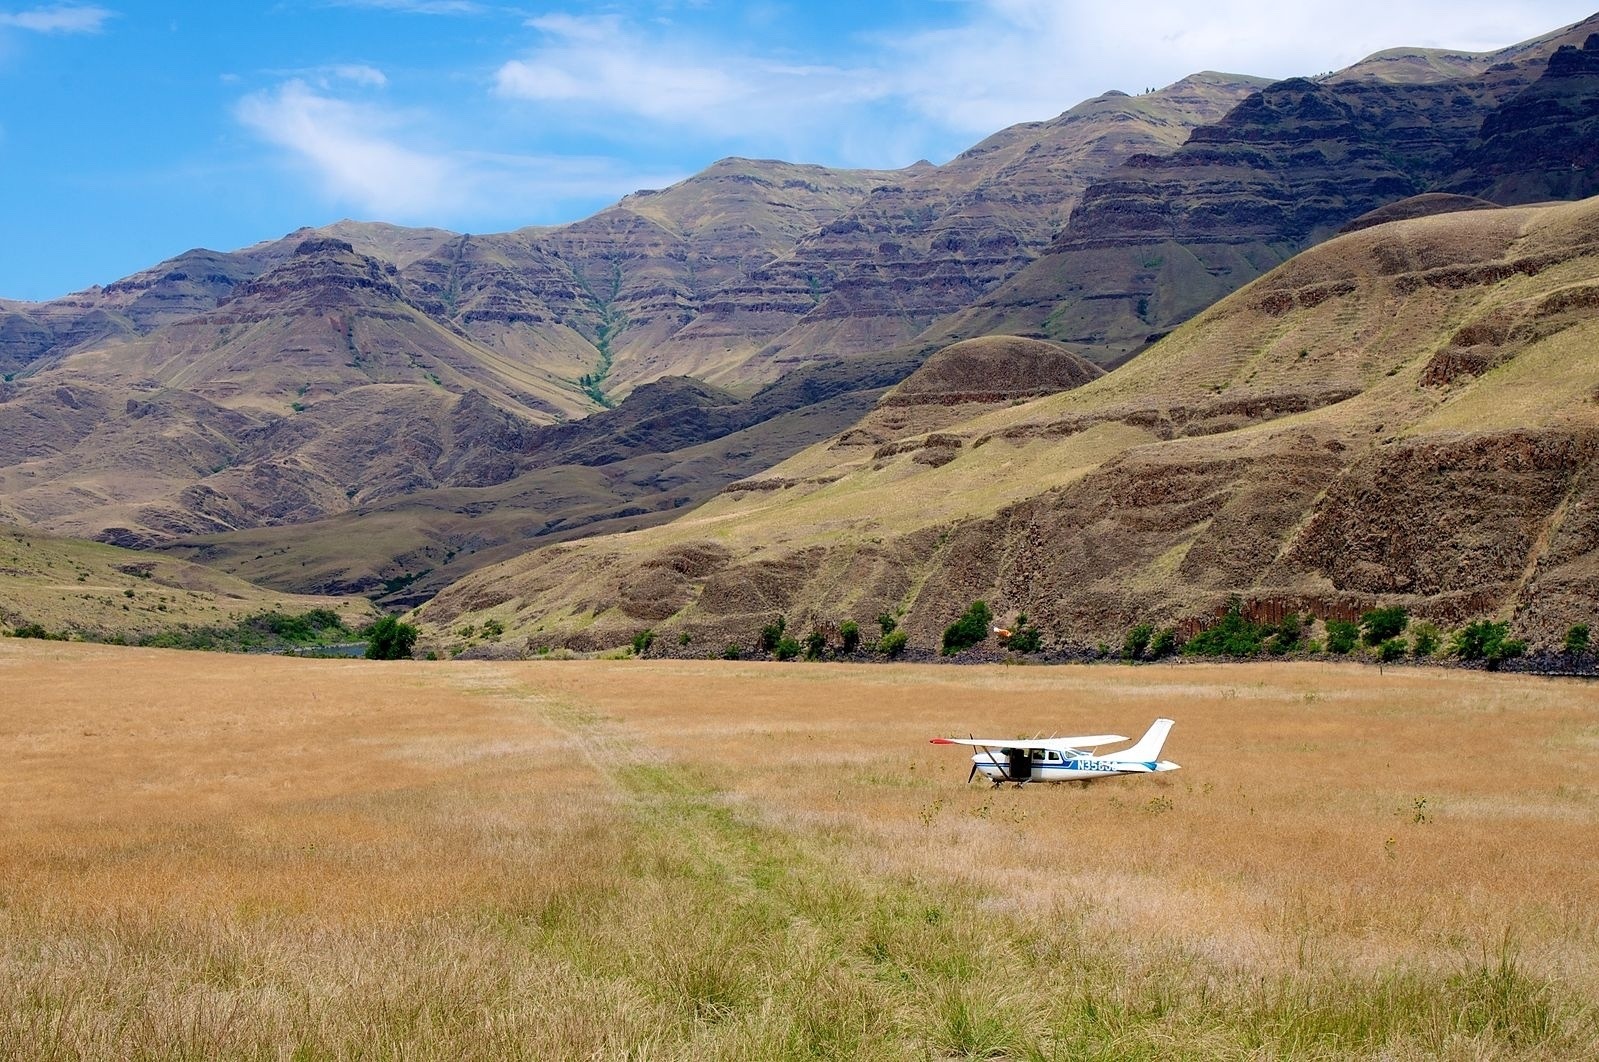 Federal wilderness areas have been spared remote airstrips like this one in Hells Canyon along the Lower Snake River in Oregon. Legislation moving through Congress would allow some wildlands to become landing strips, shattering the sense of mechanized-free isolation so rare in an ever-crowded world. Photo courtesy Sam Beebe/Ecotrust